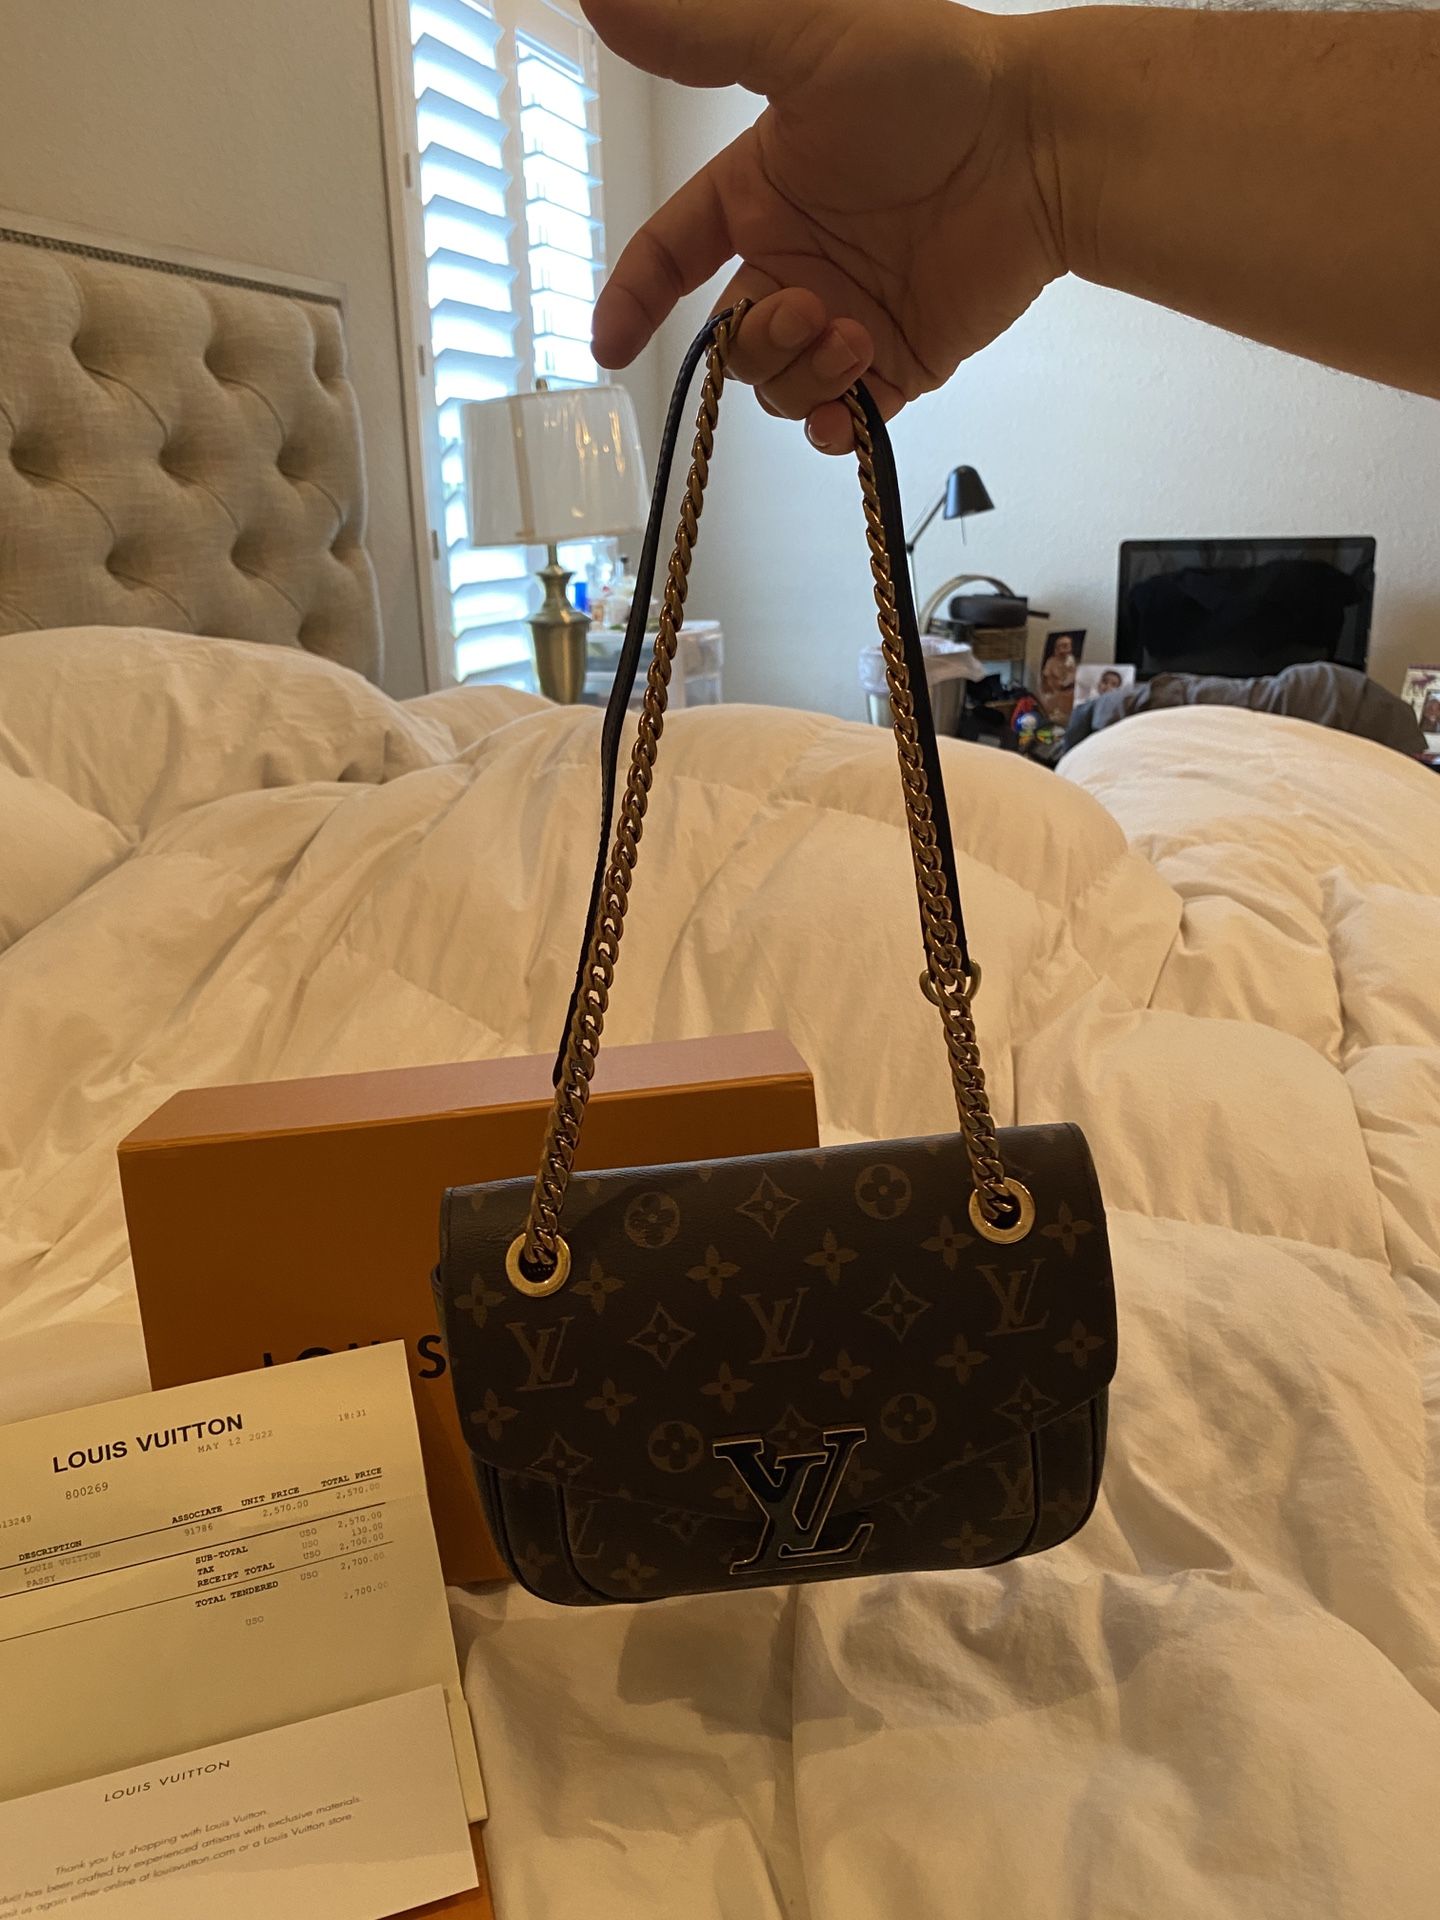 LV Passy Bag for Sale in Lubbock, TX - OfferUp